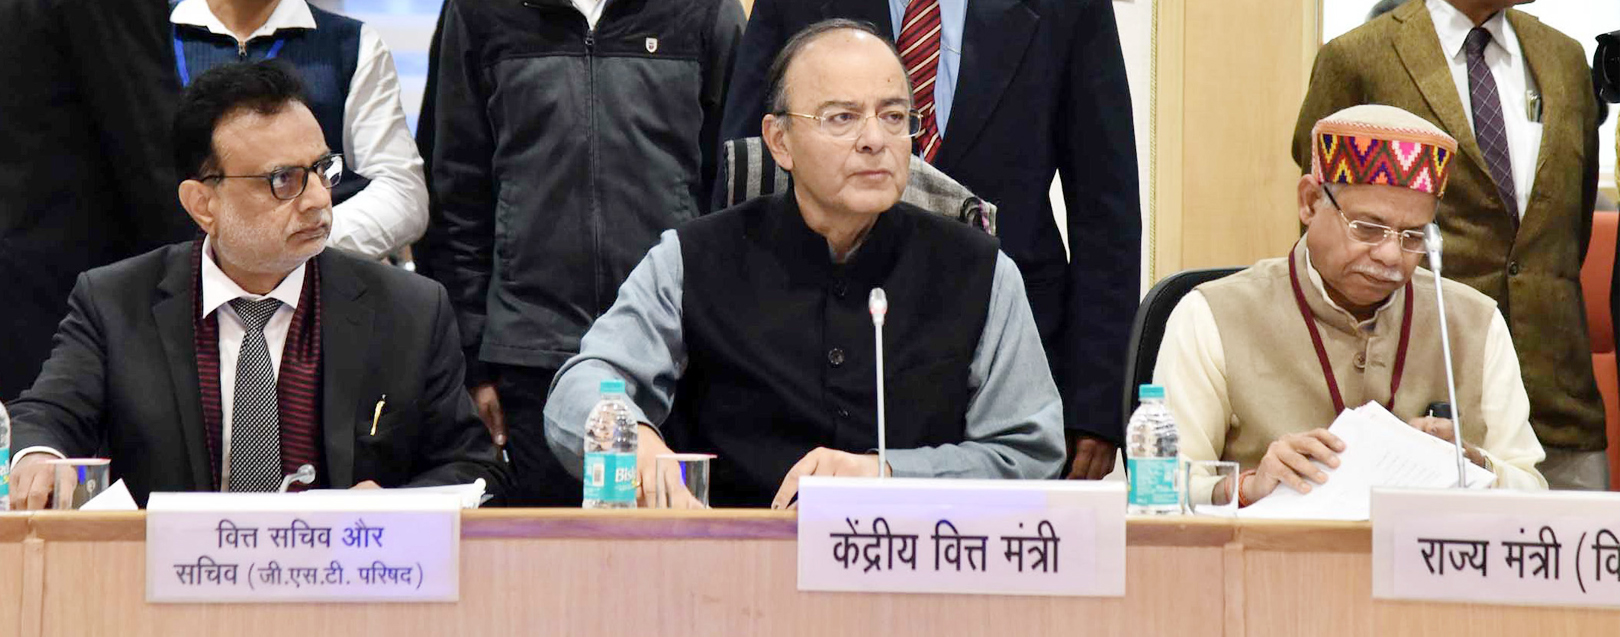 GST Council approves rate changes of 29 goods, 53 services, recommends policy changes